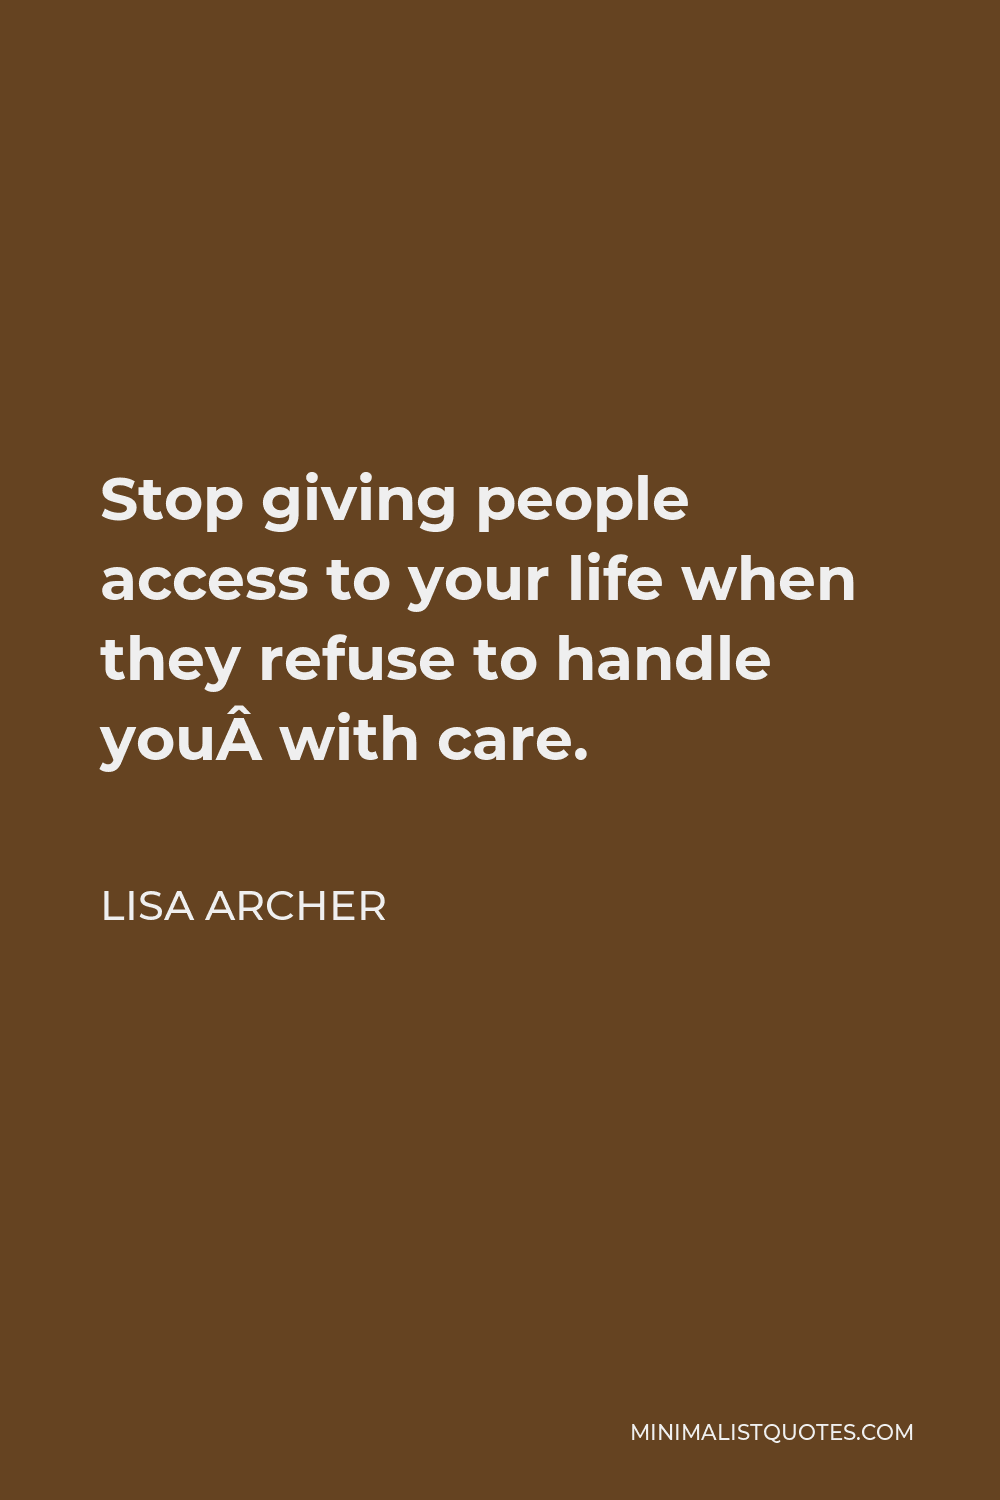 Lisa Archer Quote - Stop giving people access to your life when they refuse to handle you with care.